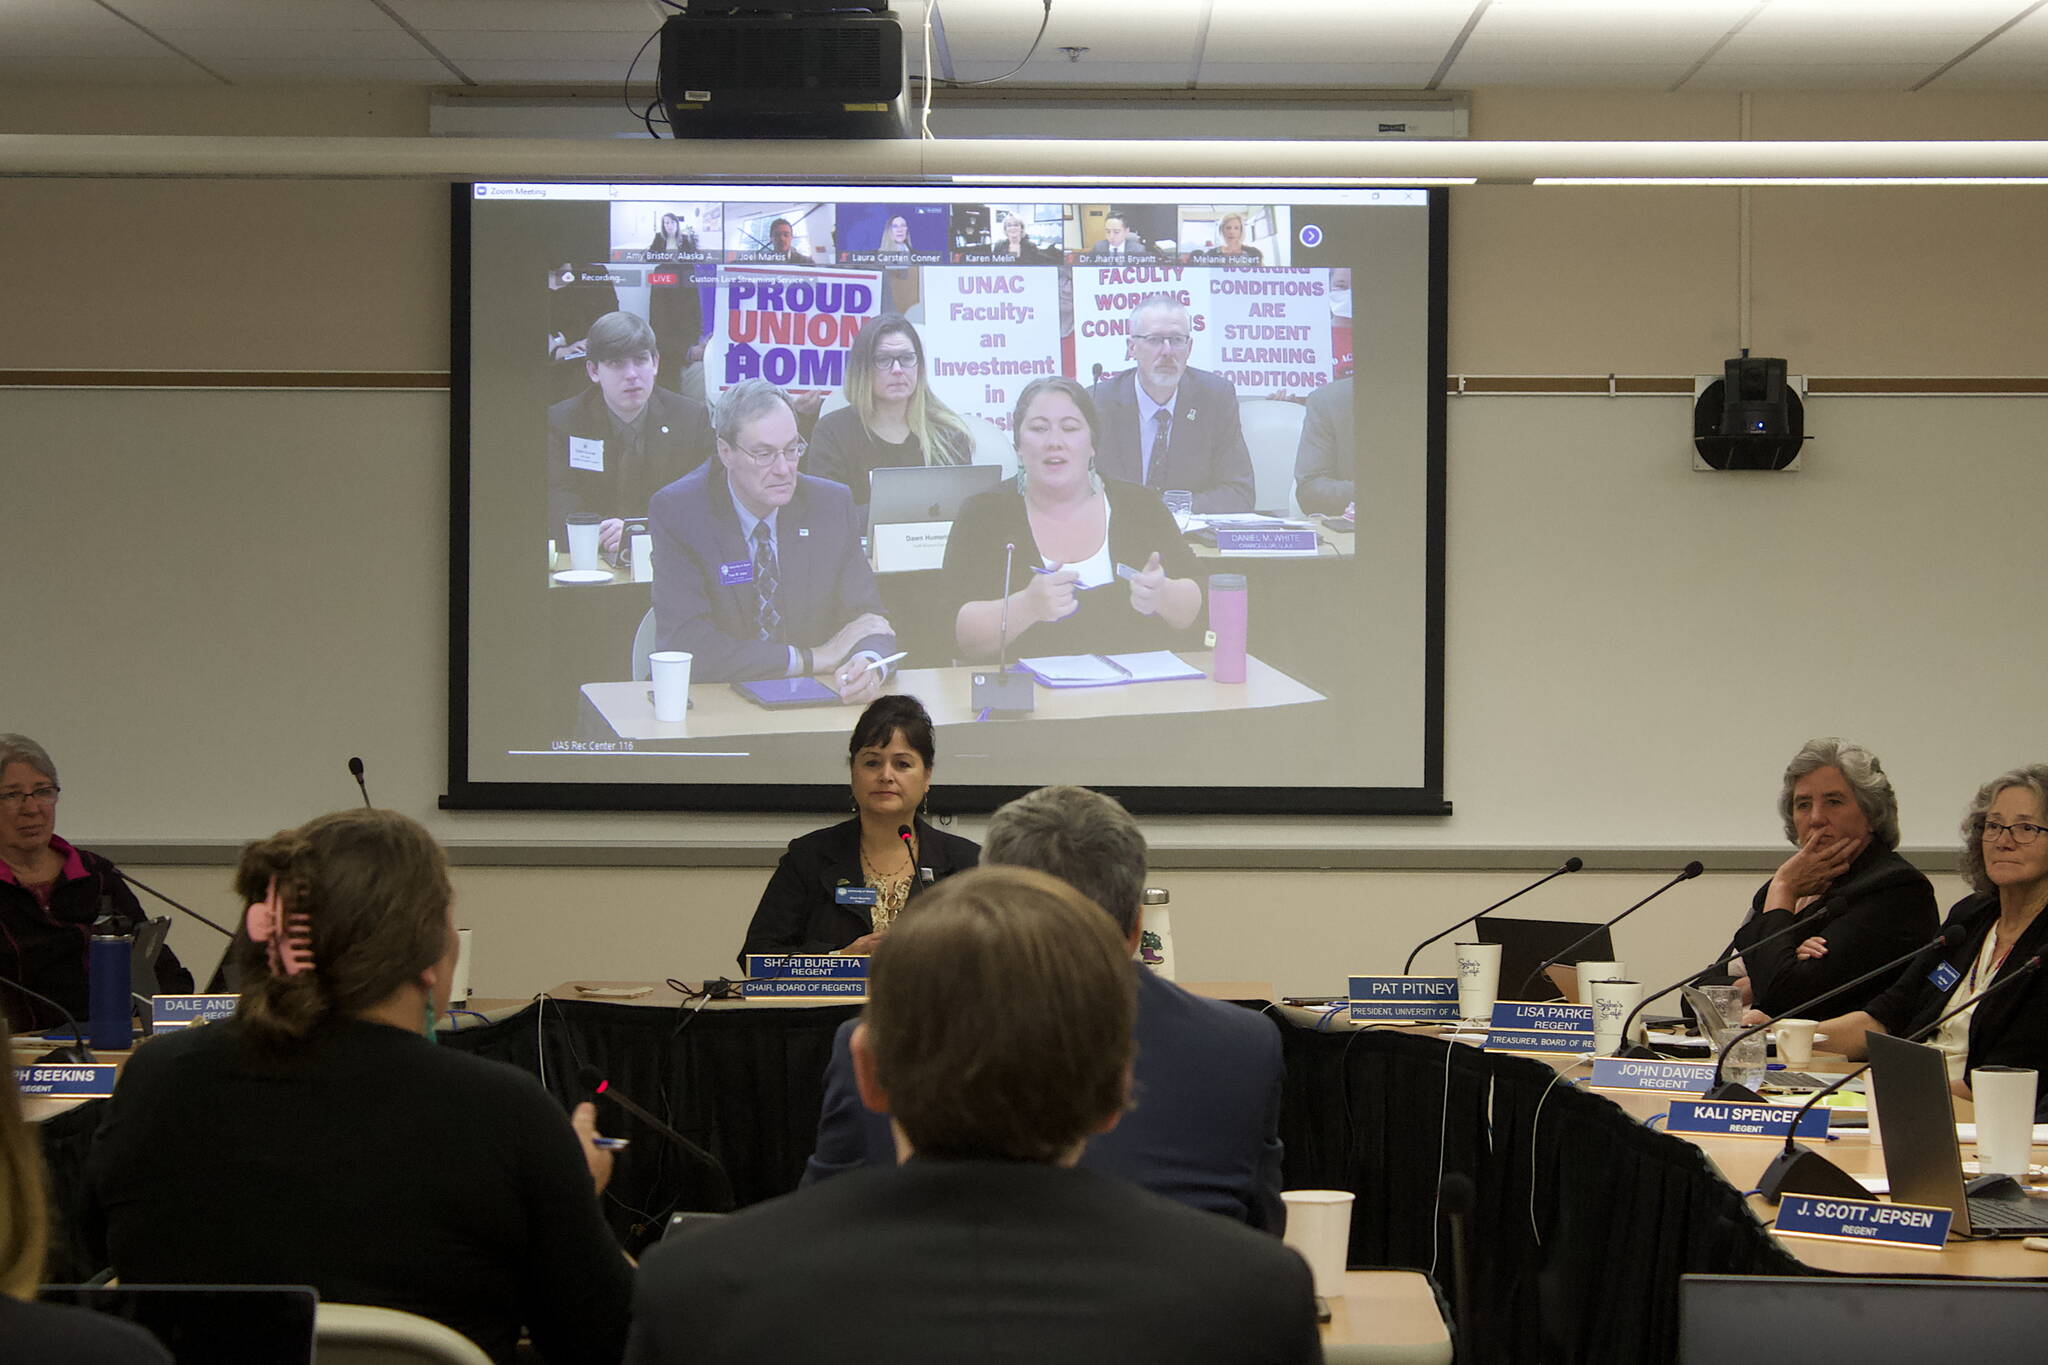 Amanda Triplett, at right on overhead screen, discusses the University of Alaska’s “Did You Know” program while faculty members in the background hold up signs protesting a labor contract stalemate during the Board of Regent’s meeting Friday in Juneau. The program highlights cooperative efforts the university is participating in with communities such as workplace experience and dual enrollments with other educational institutions. (Mark Sabbatini / Juneau Empire)